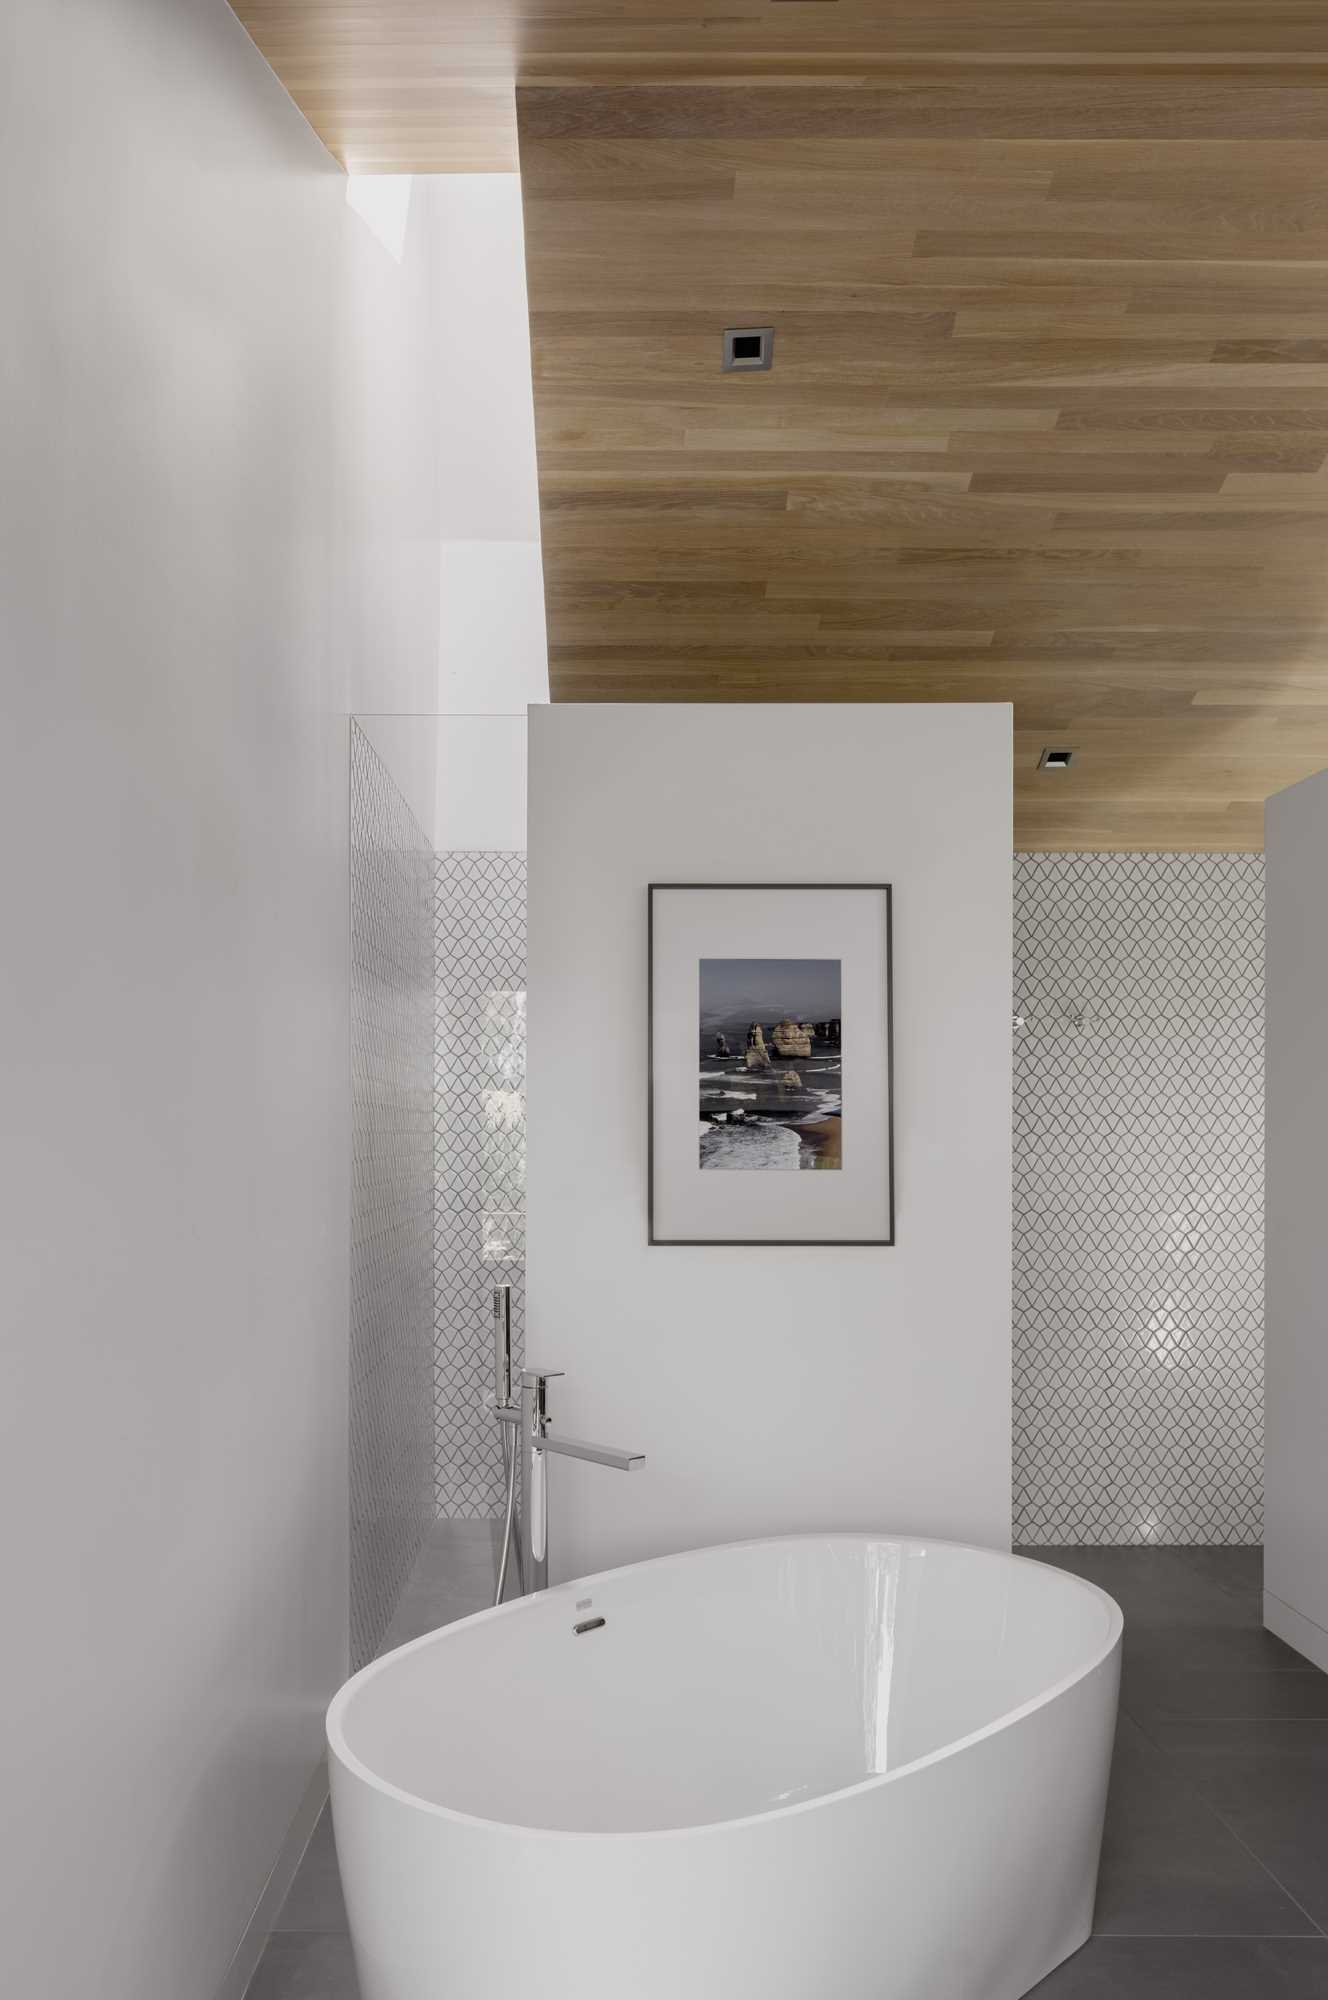 A remodeled bathroom has free-standing tub and south-facing vanity for two that are separated by a pair of part-height walls that allow light to spill over into a private walk-in shower area that is topped by a skylight and toilet room.